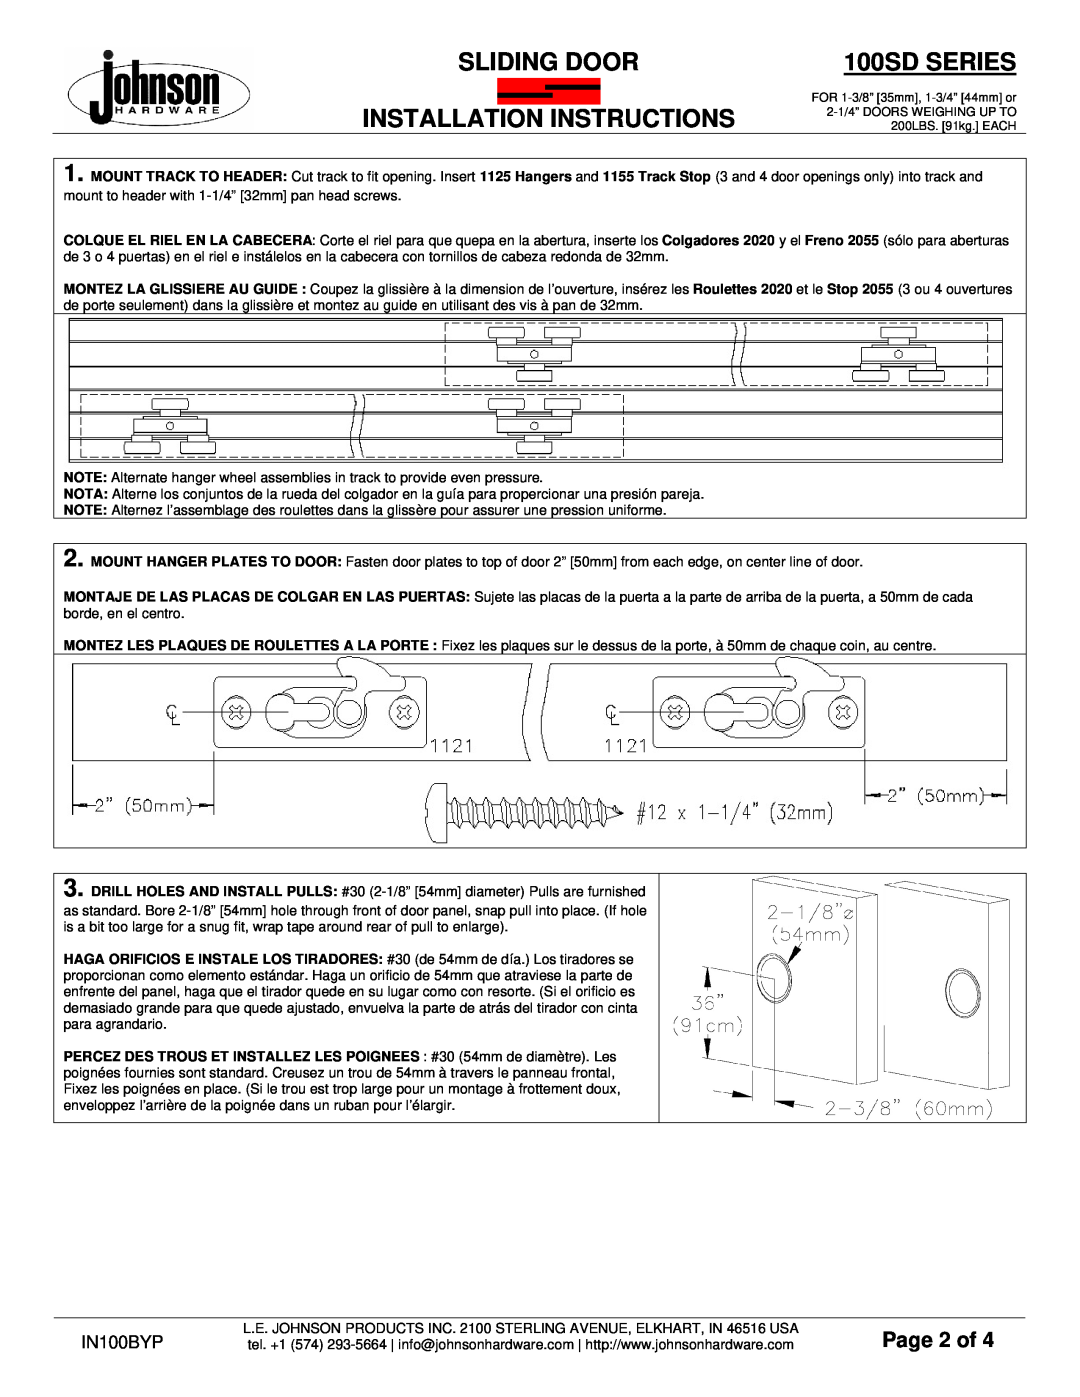 Johnson Hardware 100SD Series 100SD SERIES, Sliding Door, Installation Instructions, Page 2 of, IN100BYP 